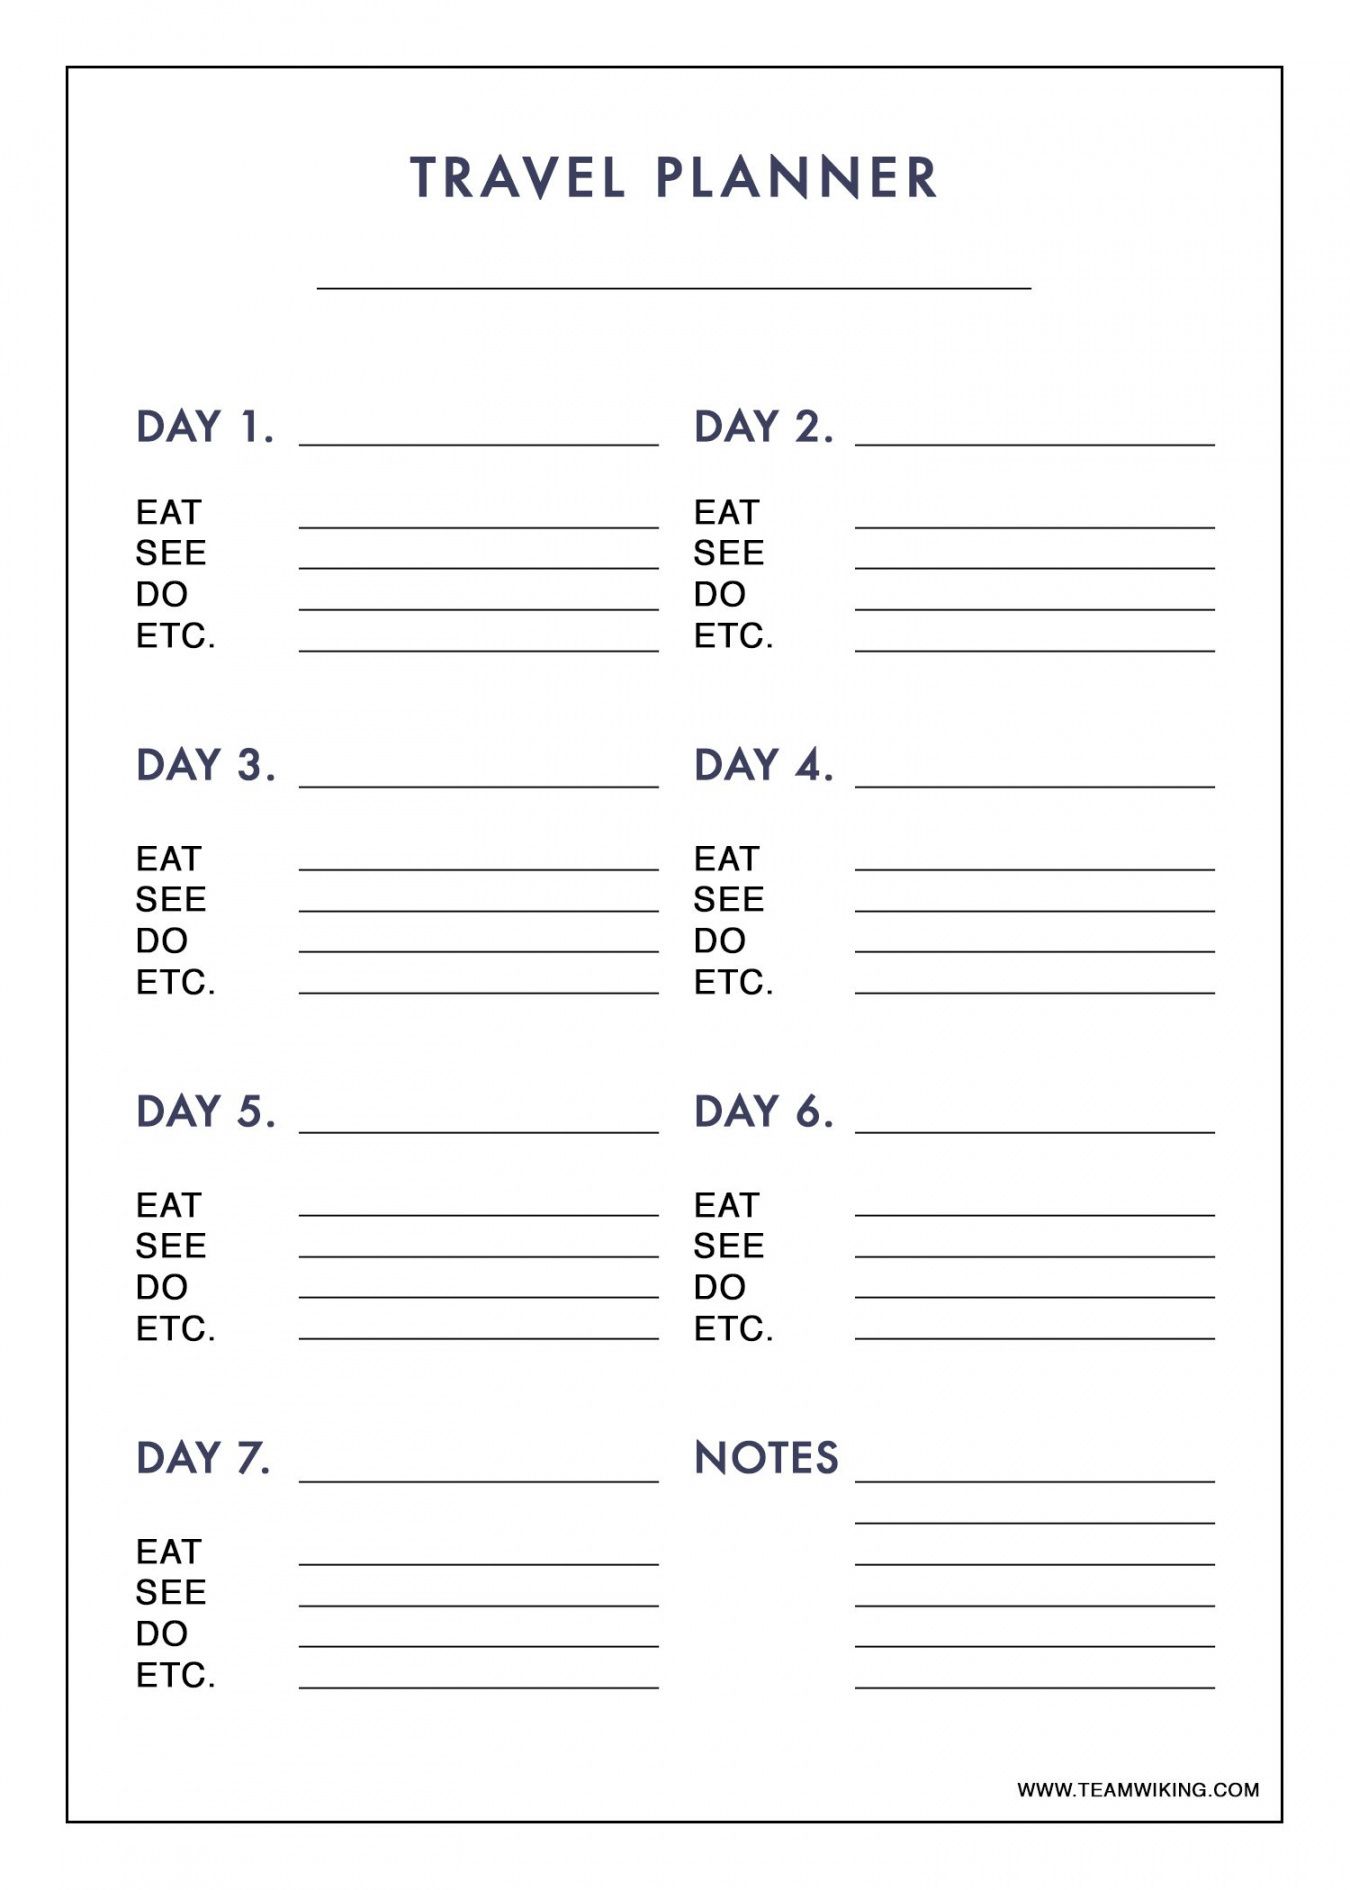 editable free printable 7 day travel planner use to plan outfits day by day travel itinerary template